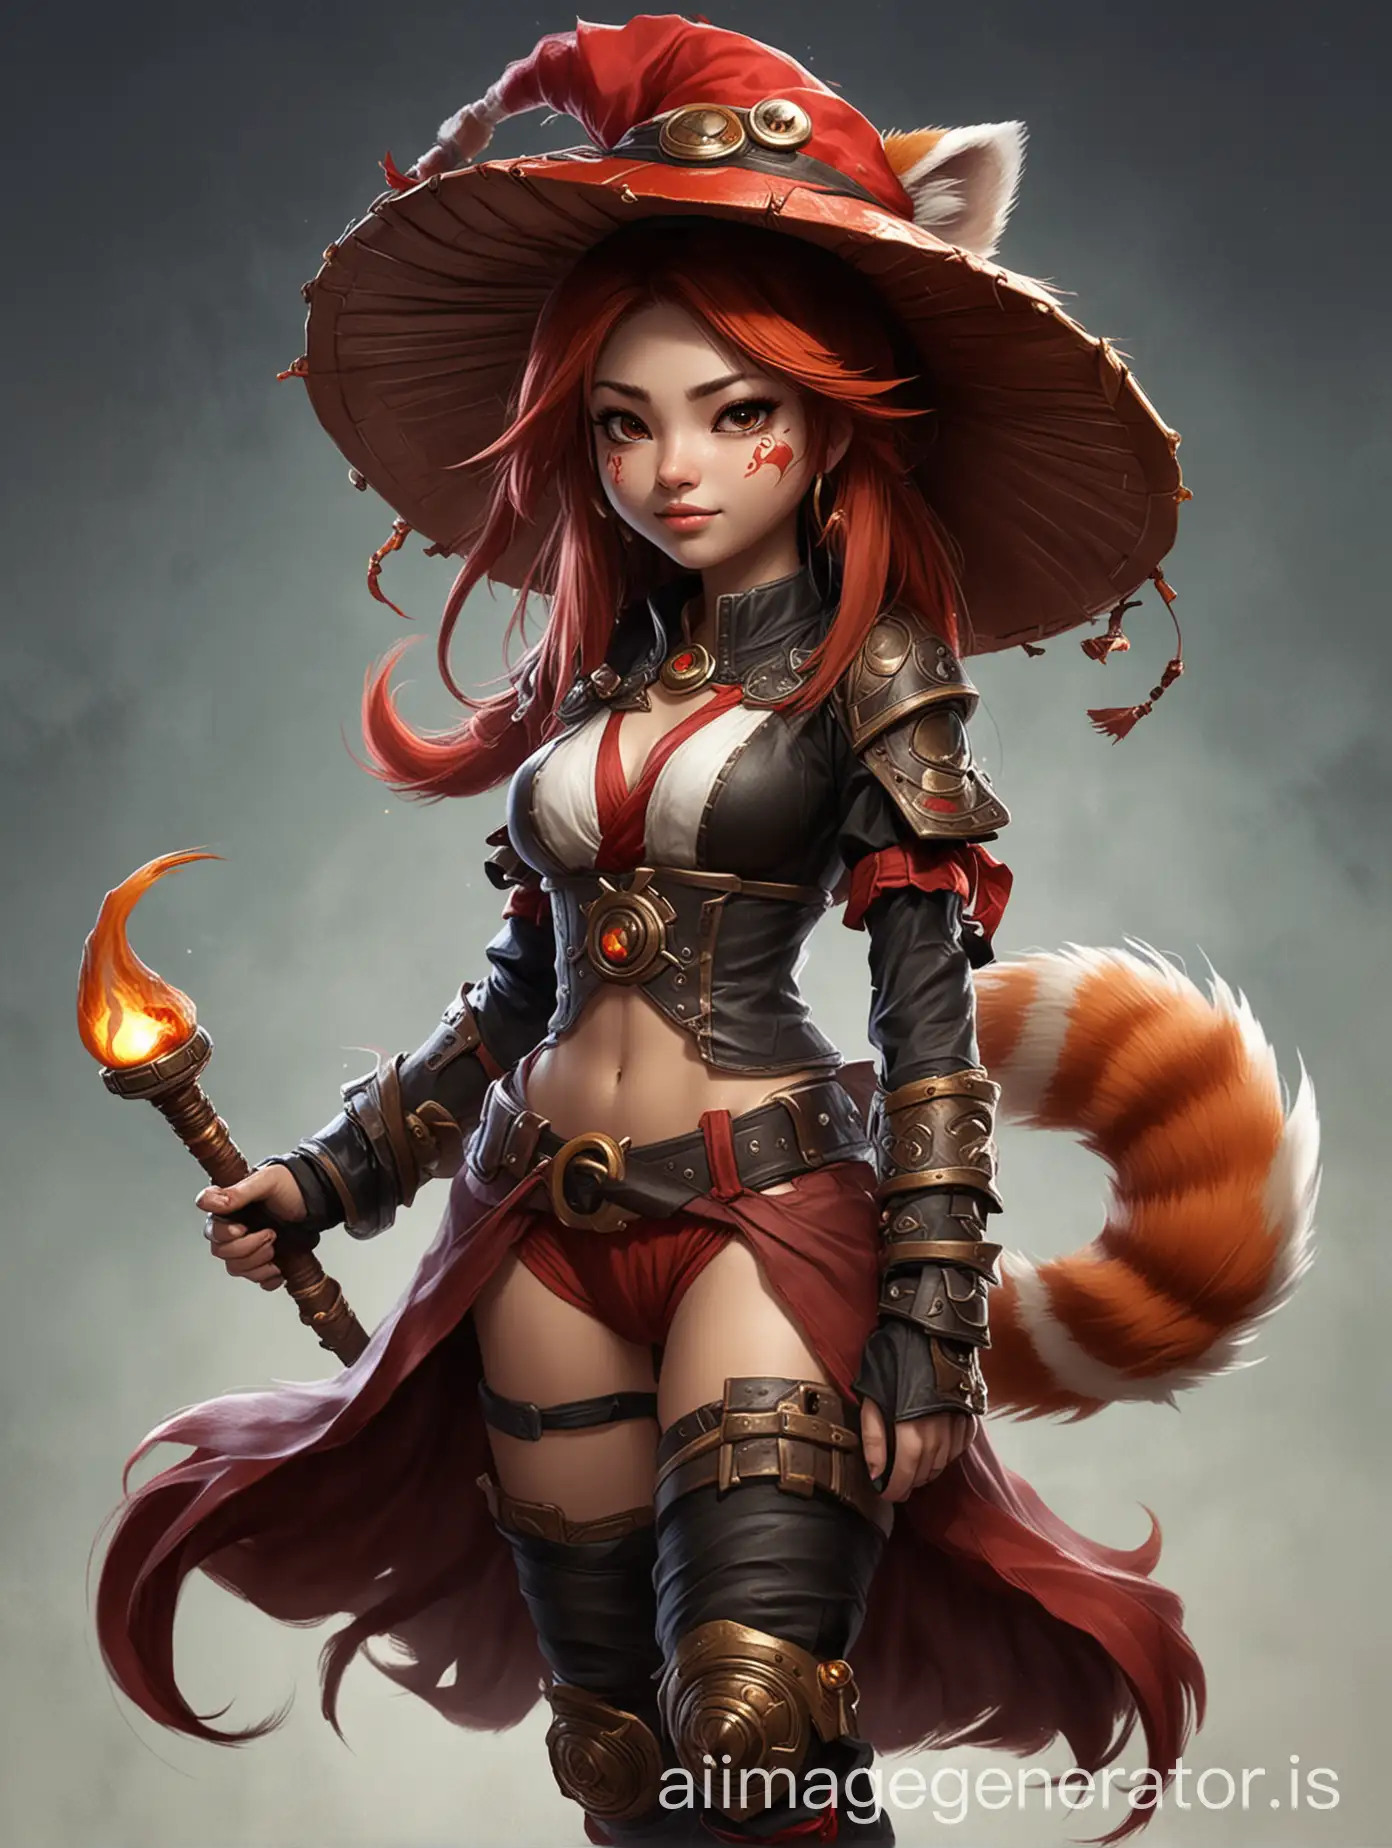 leauge of legends champion and her skill is based on yin and yang. she needs to be red panda character with a conical vietnam hat. Around her yin and yang logo needs to be there. young age around 8 and mischeif face.